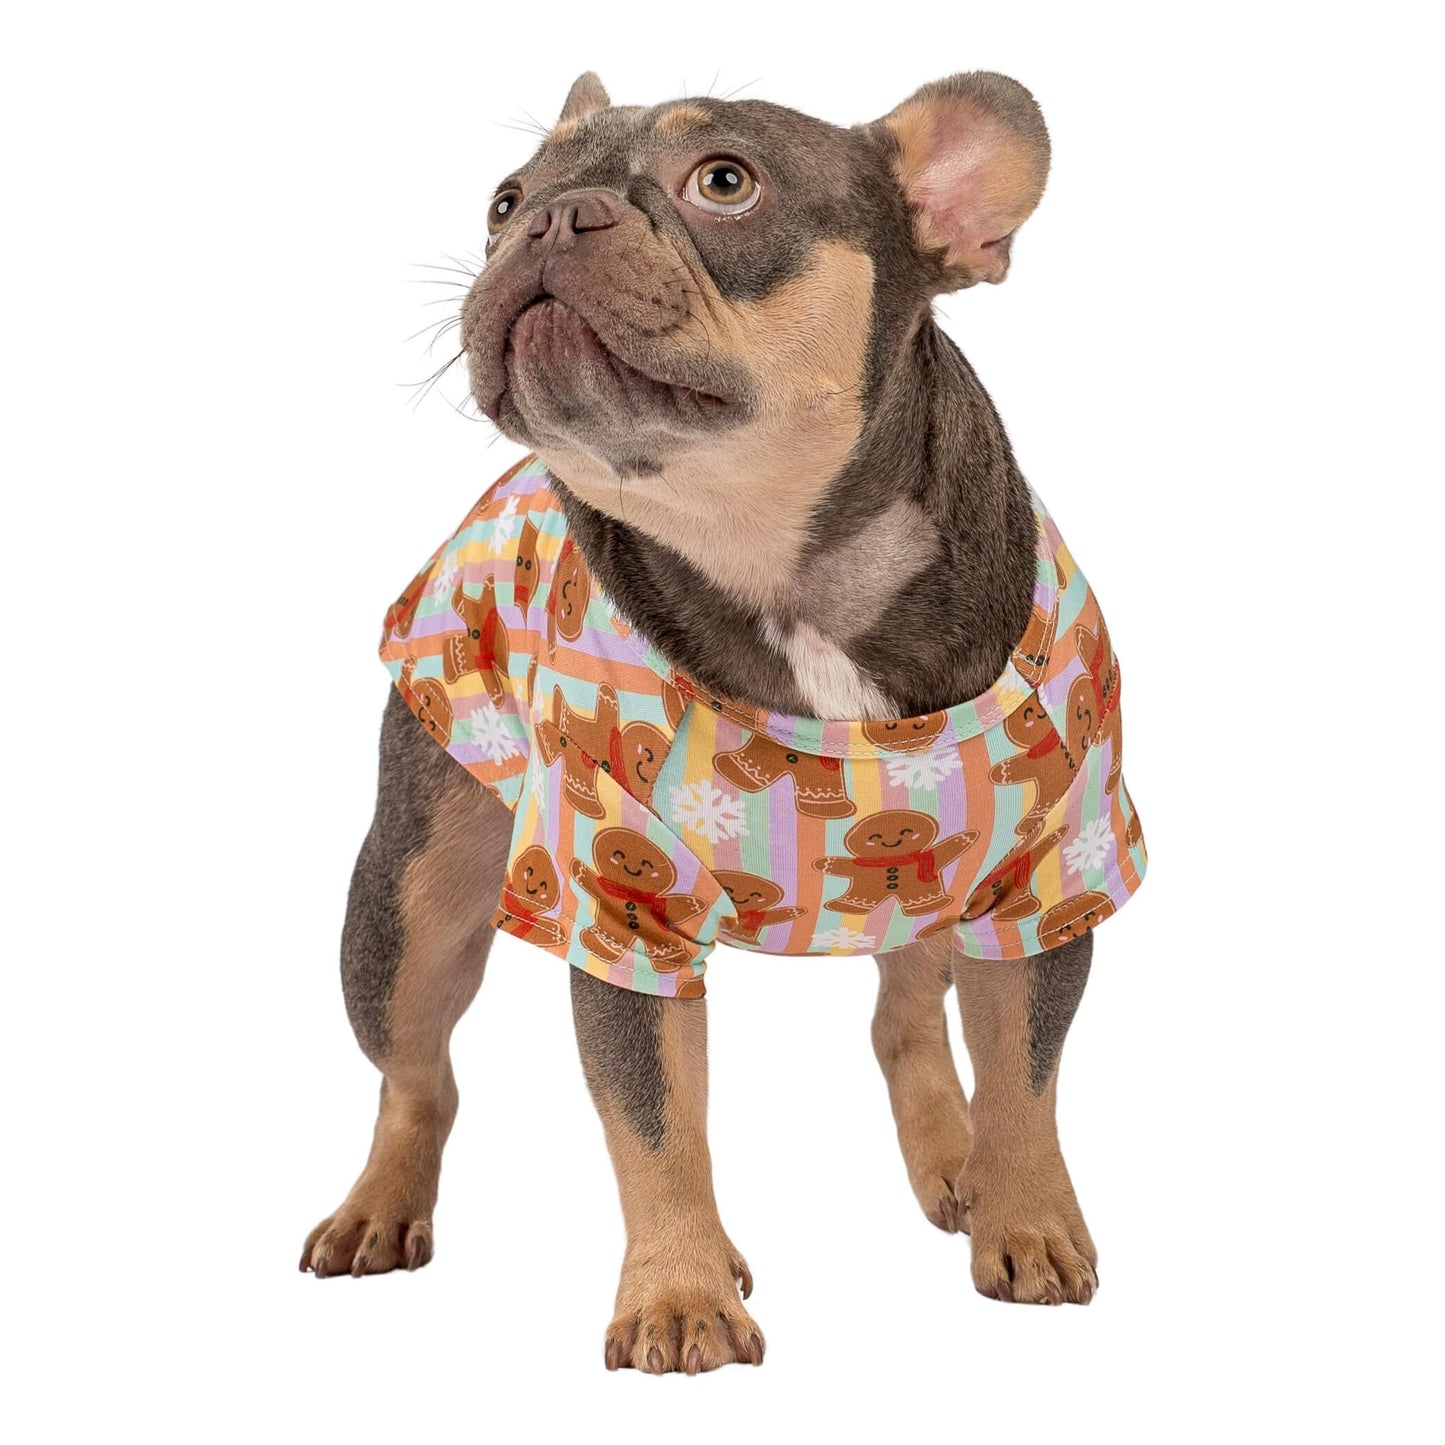 Wednesday the French Bulldog wearing a Vibrant Hound Gingerbread Cheer shirt for dogs. It has vertical rainbow stripes with Christmas GIngerbread pritned on the shirt.